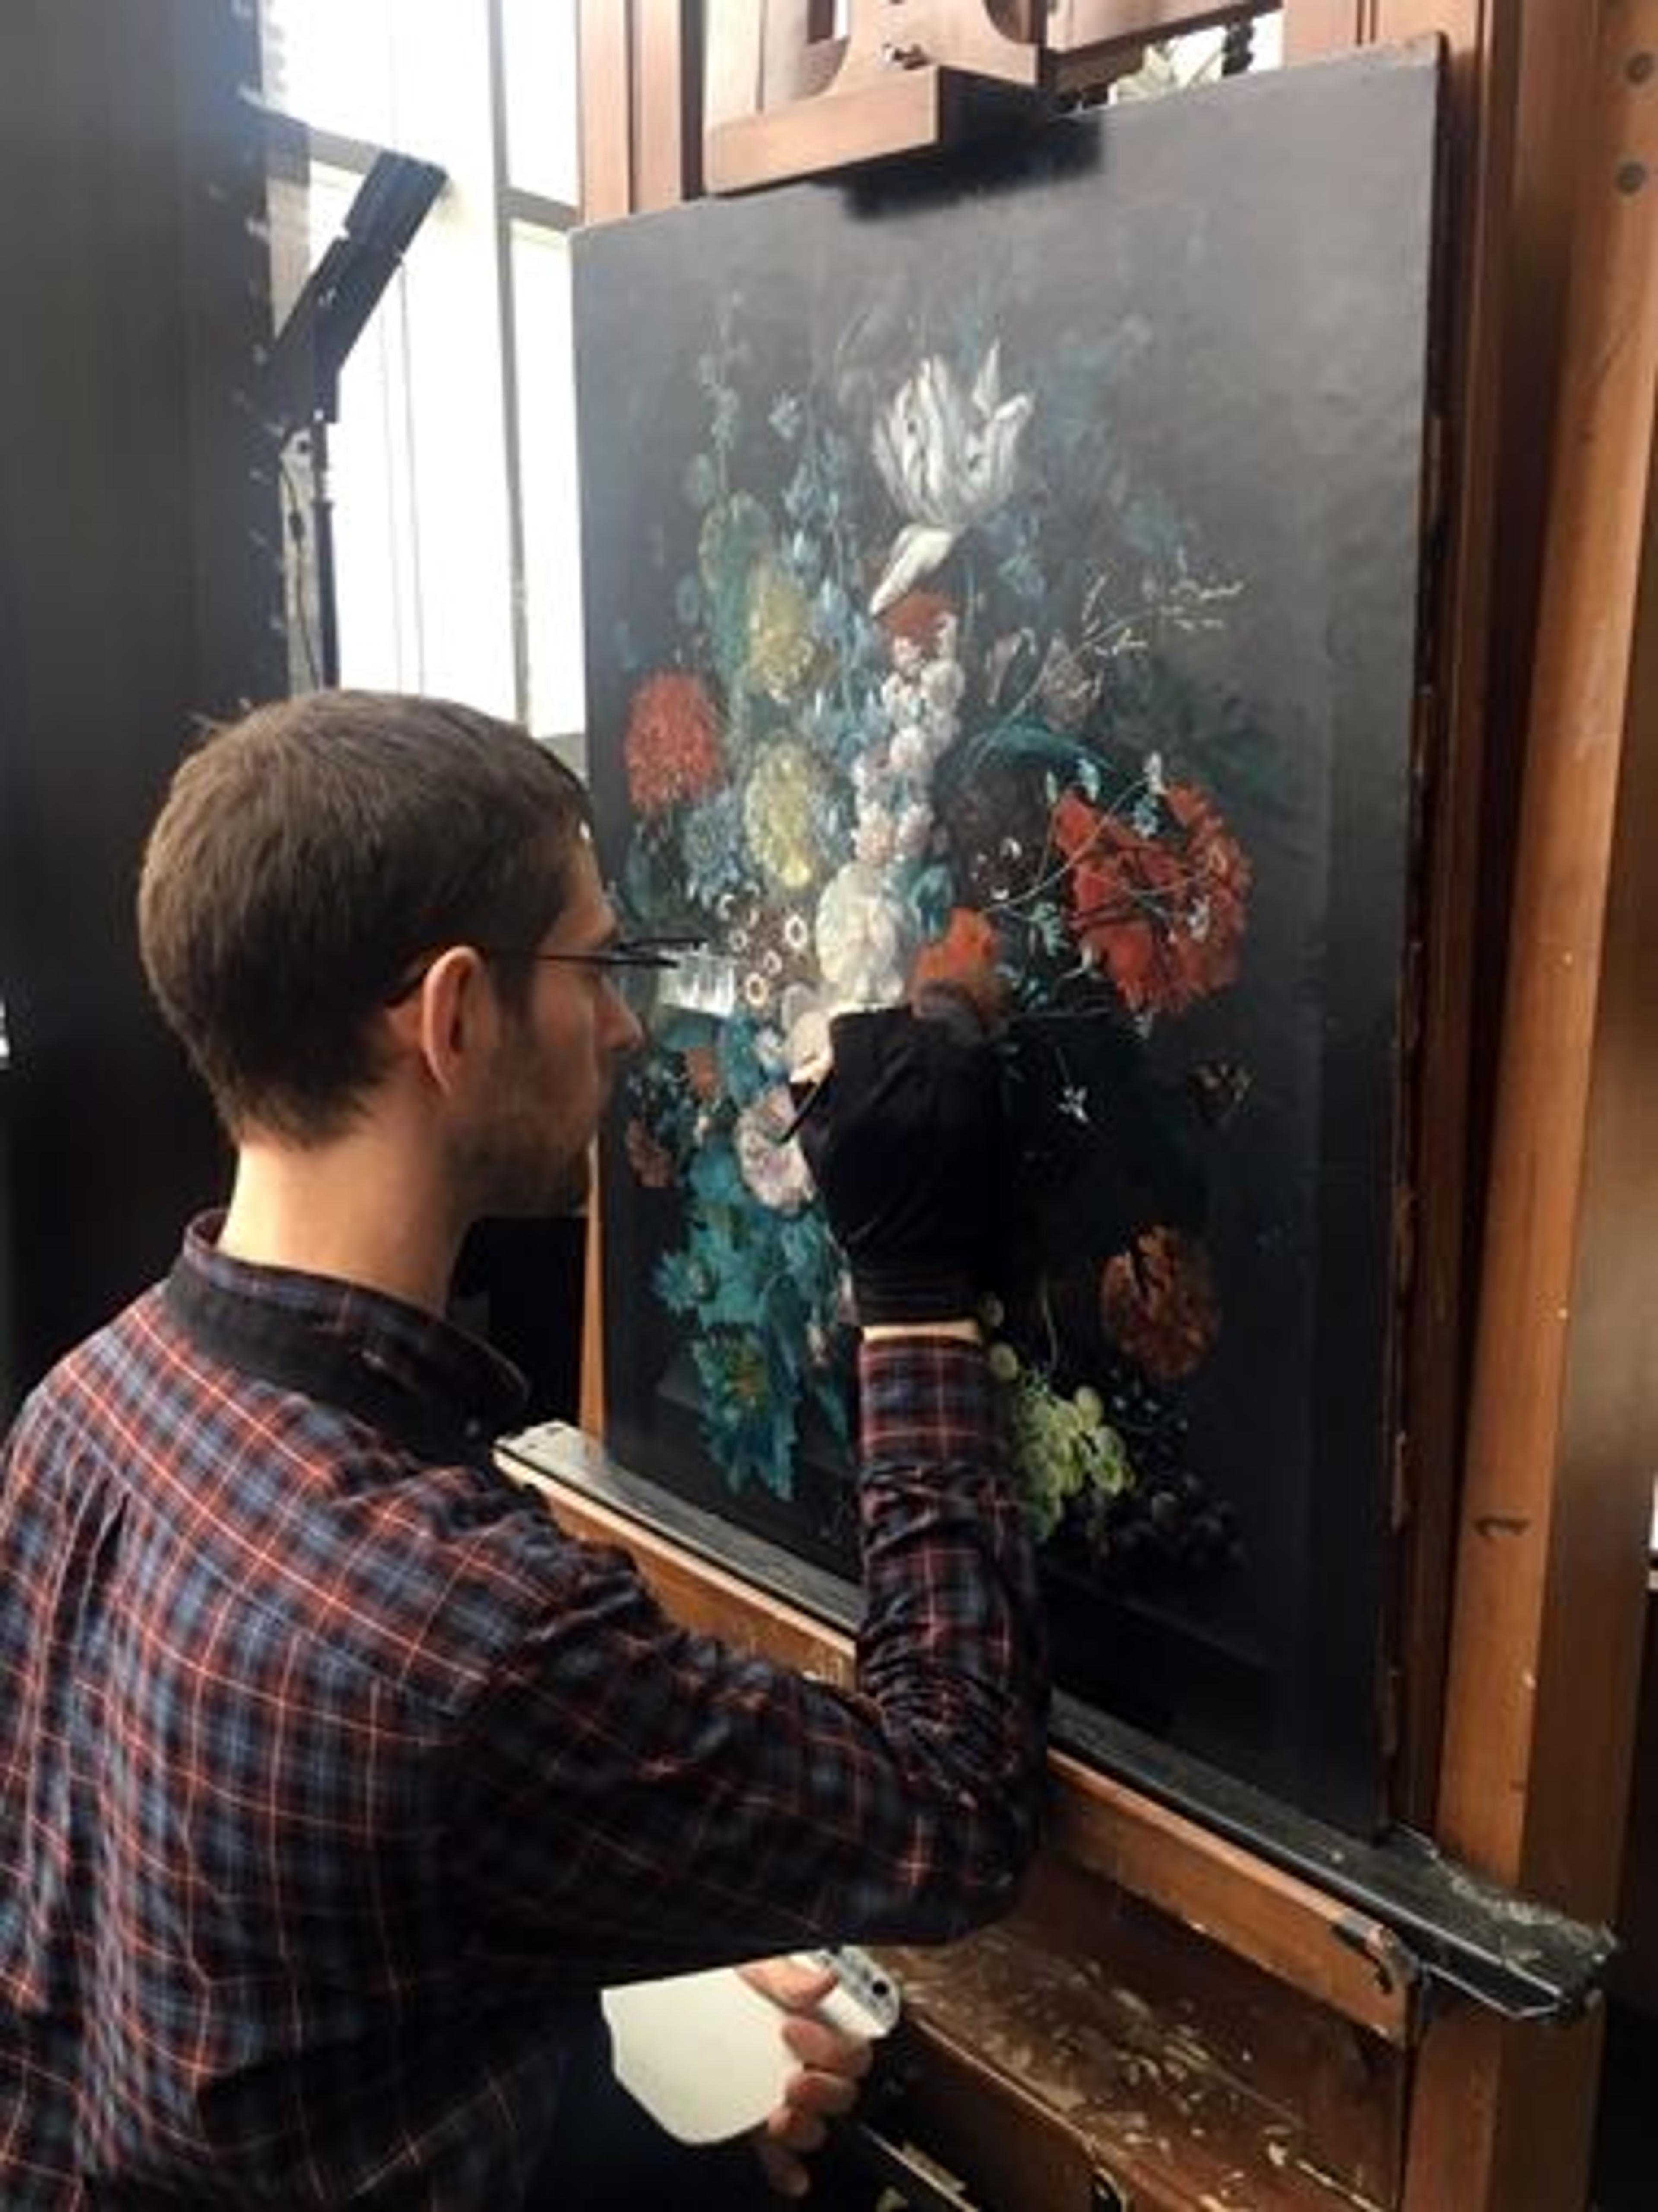 A conservator retouches small damages to a Dutch Golden Age painting of a vase of flowers in a conservation studio